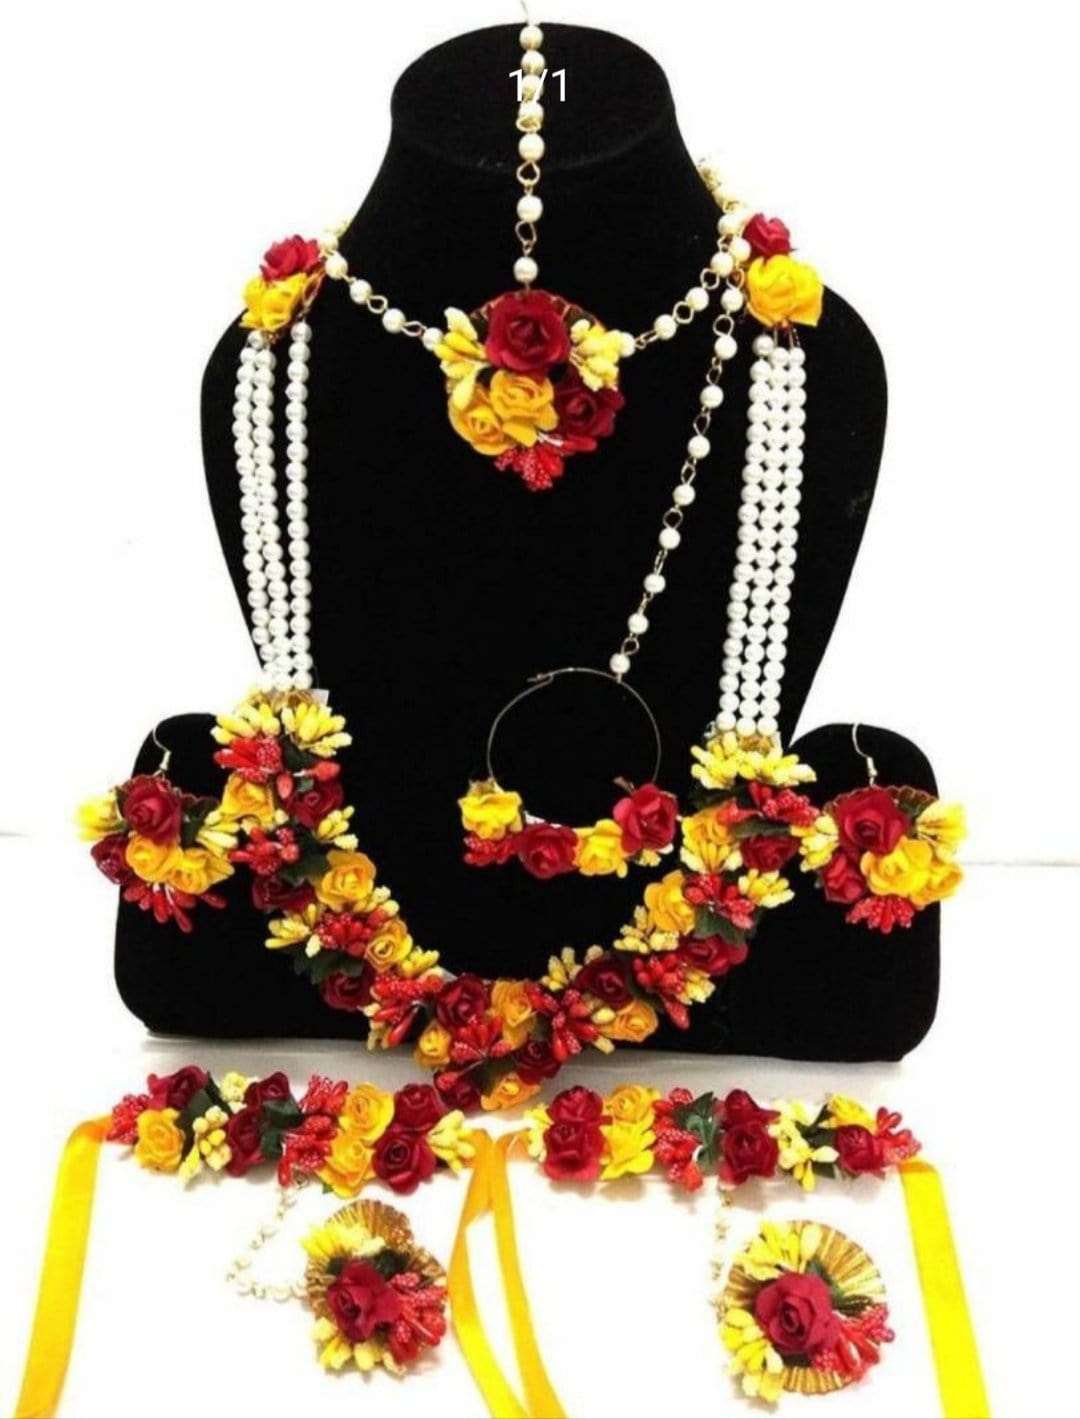 Lamansh Flower 🌺 Jewellery 1 Necklace,1 Nath, 1 Maangtika with side chain, 2 Earrings & 2 Bracelets Attached with ring / Yellow-Red LAMANSH® Flower 🌺 Jewellery Set with Nosering / Floral set